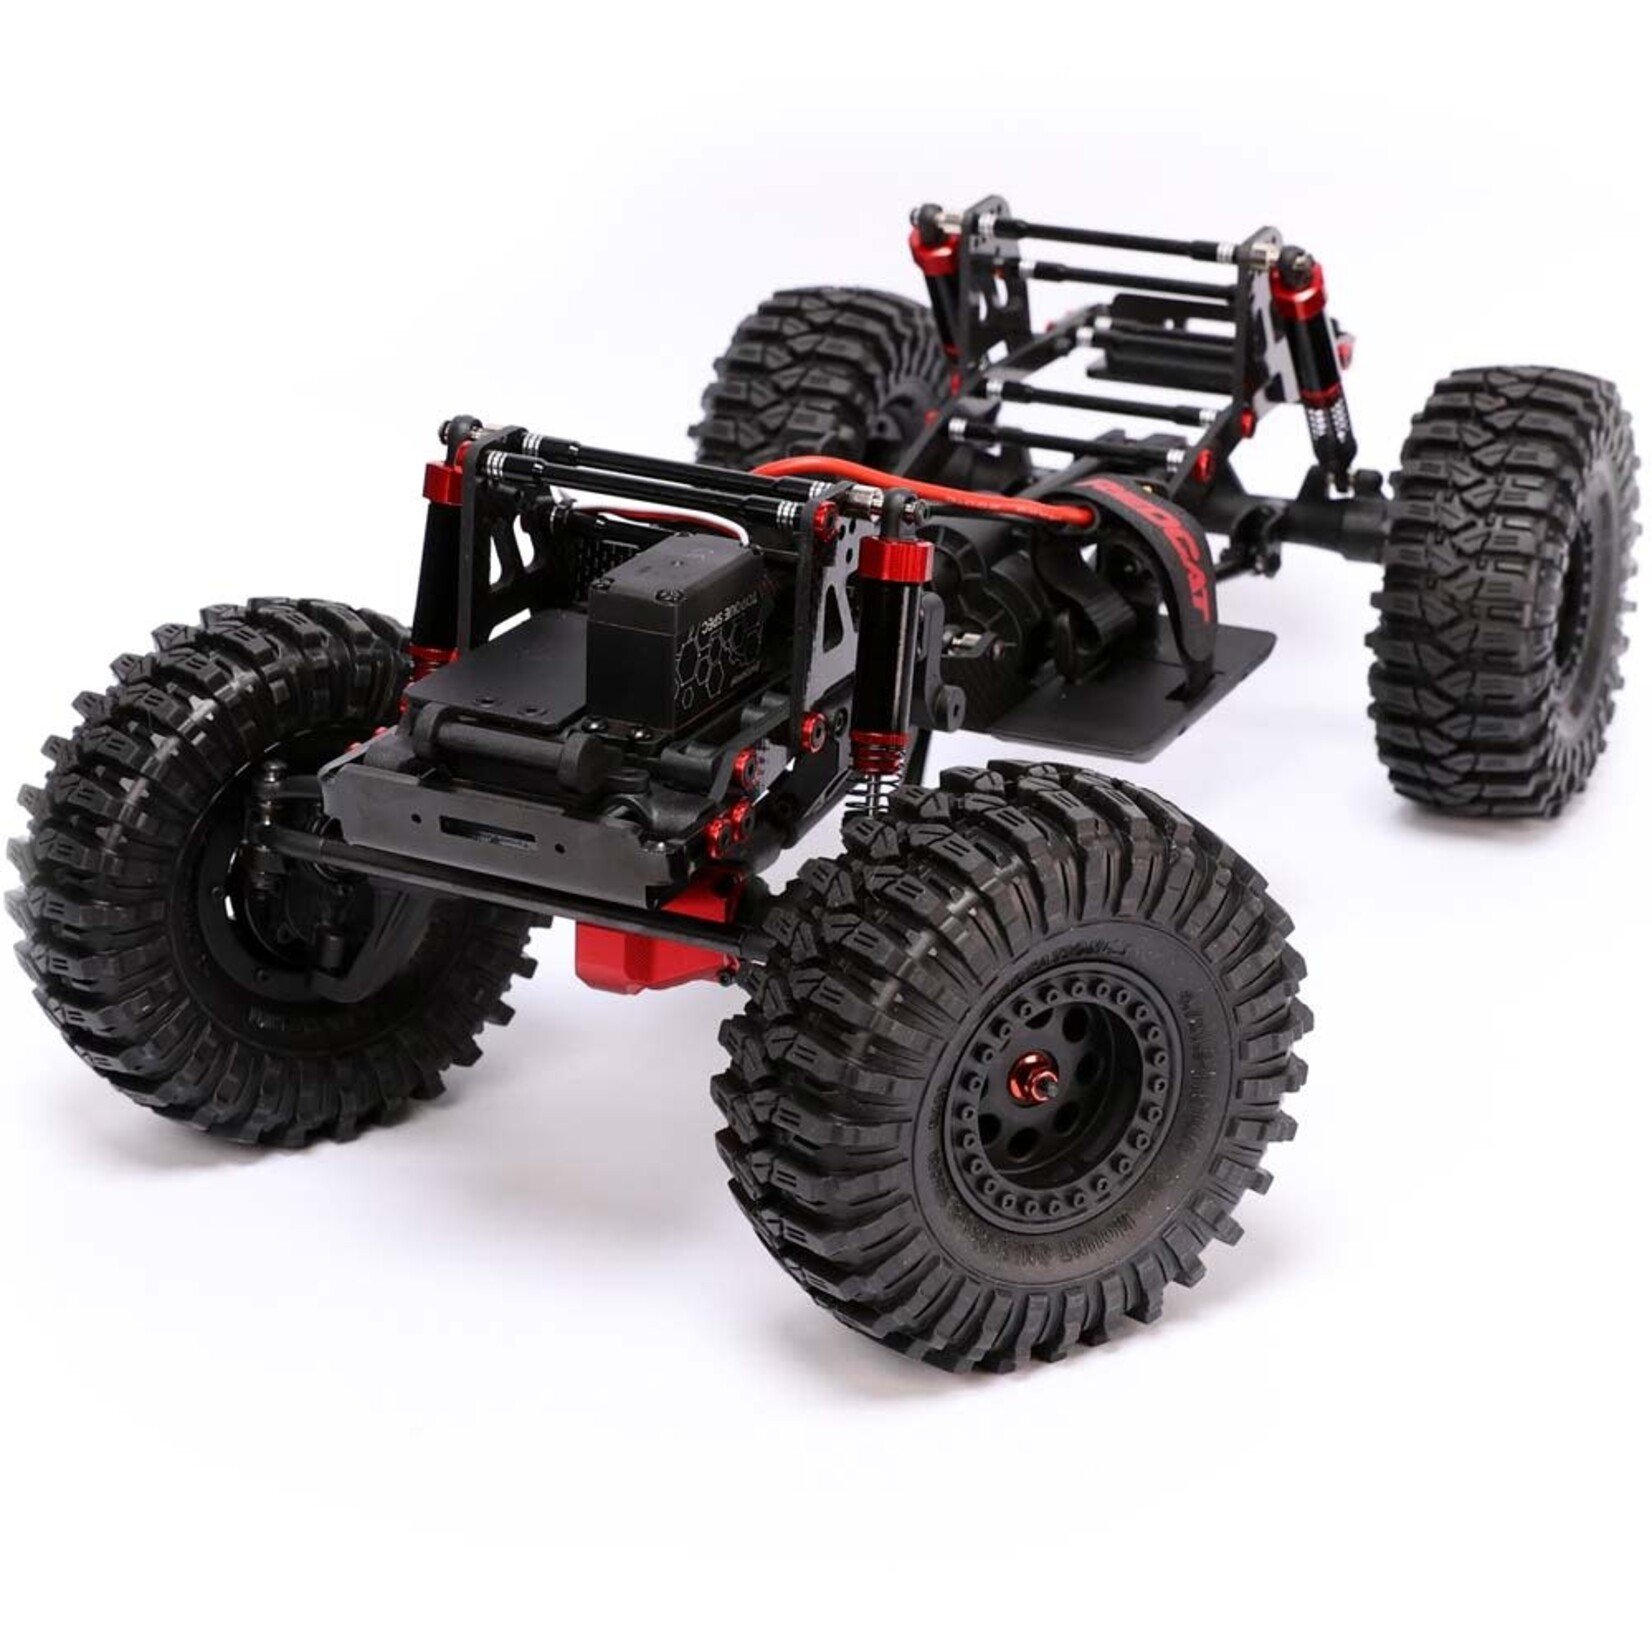 Redcat Racing Ascent Fusion 1/10 Scale Brushless